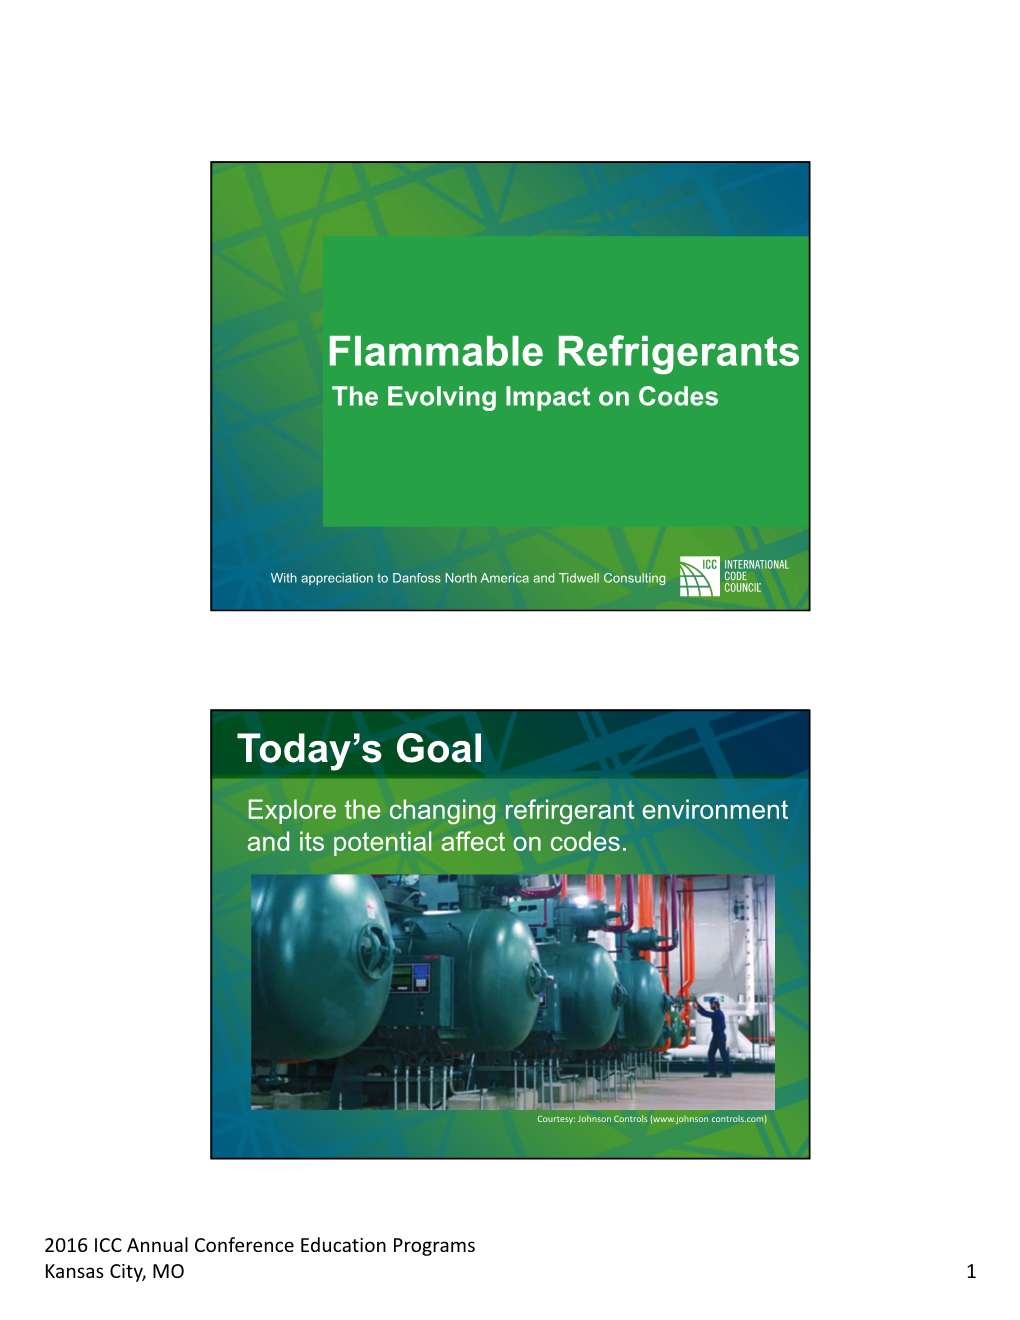 Flammable Refrigerants the Evolving Impact on Codes